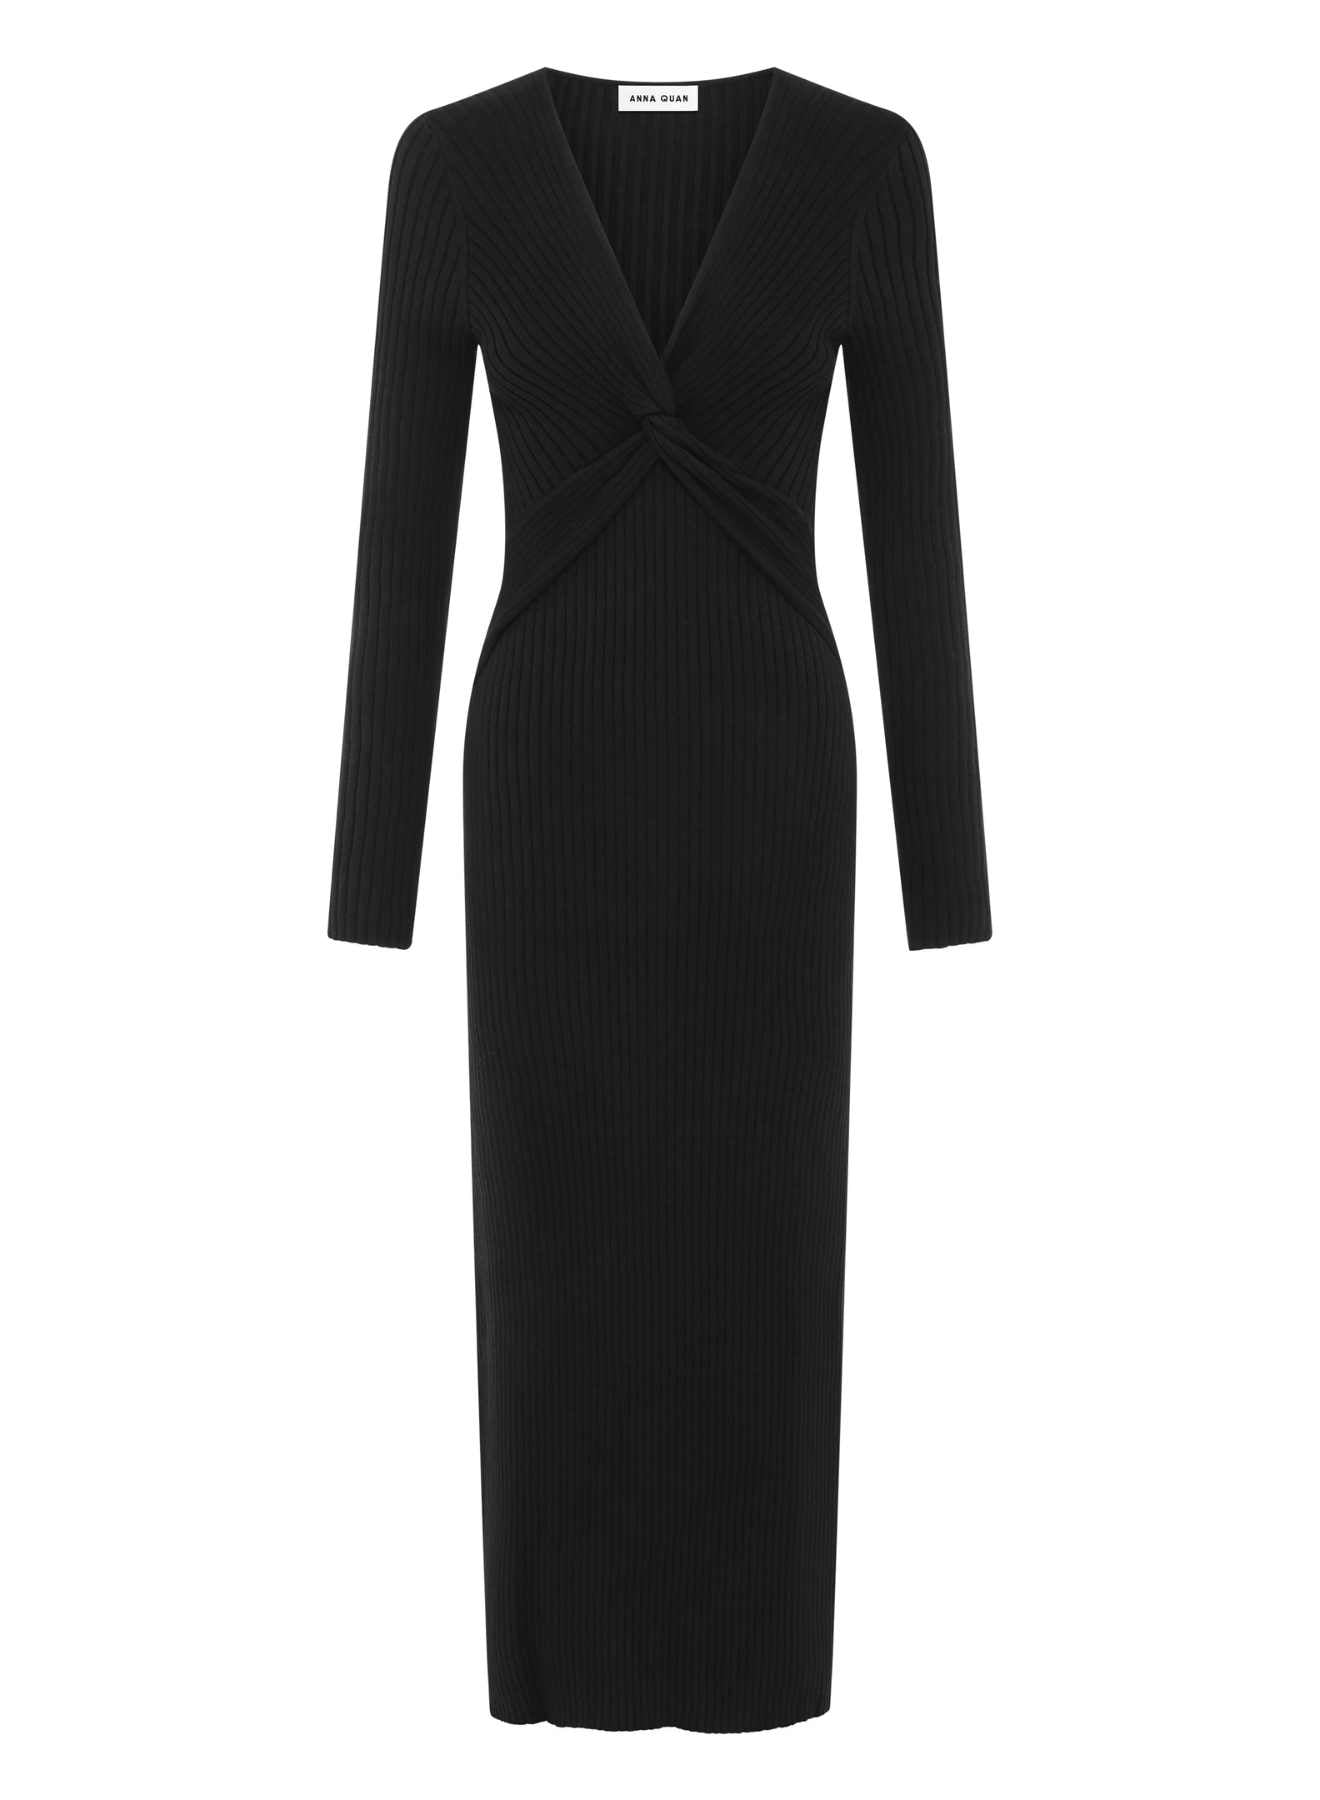 Long Sleeve ANNA QUAN Knit Maxi Dress, featuring a centre front twist, long sleeves and hem finishing just above the ankle. Elevate your everyday style with this chic and comfortable piece. Day dress, work dress, dress for work, winter dress, everyday dress, black knit dress, black long sleeve dress.